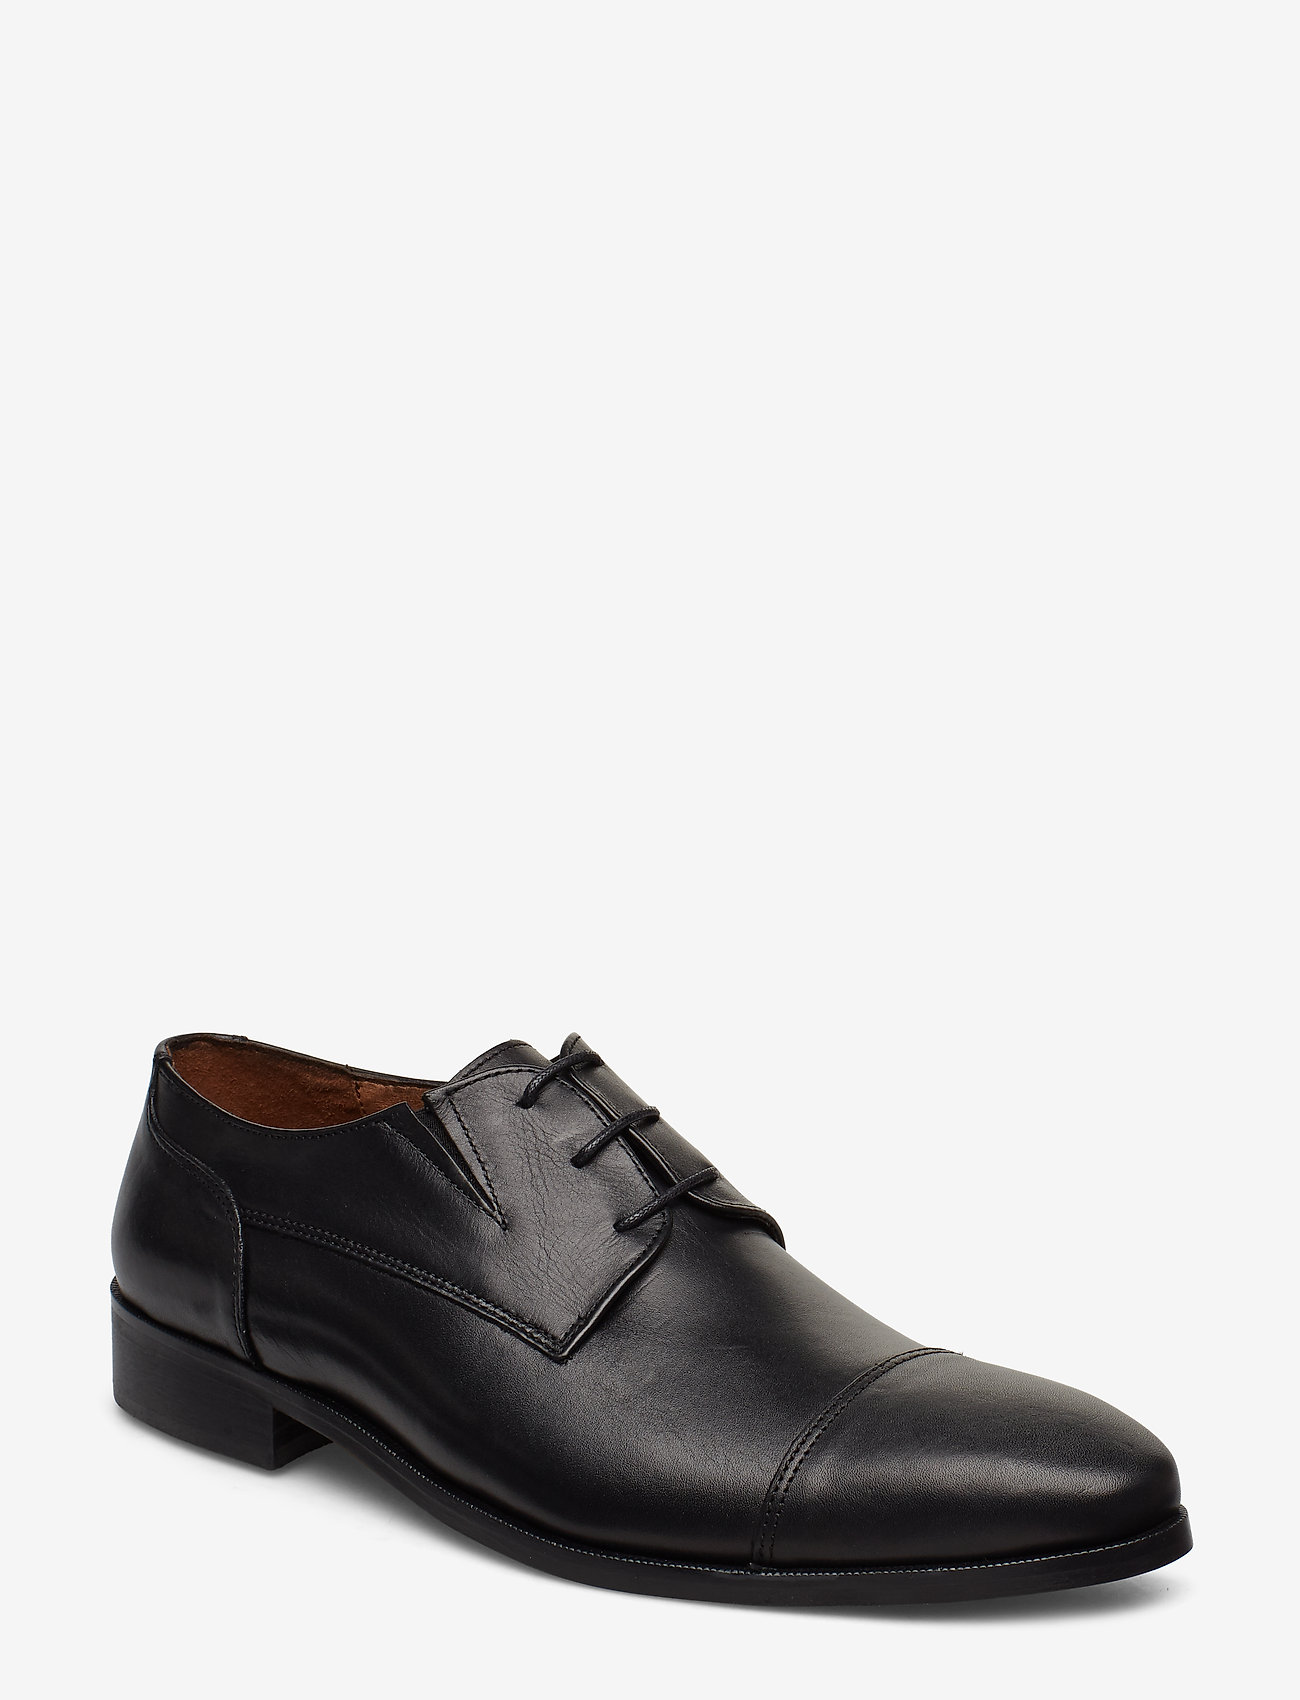 Lindbergh - Classic leather shoe - laced shoes - black - 0